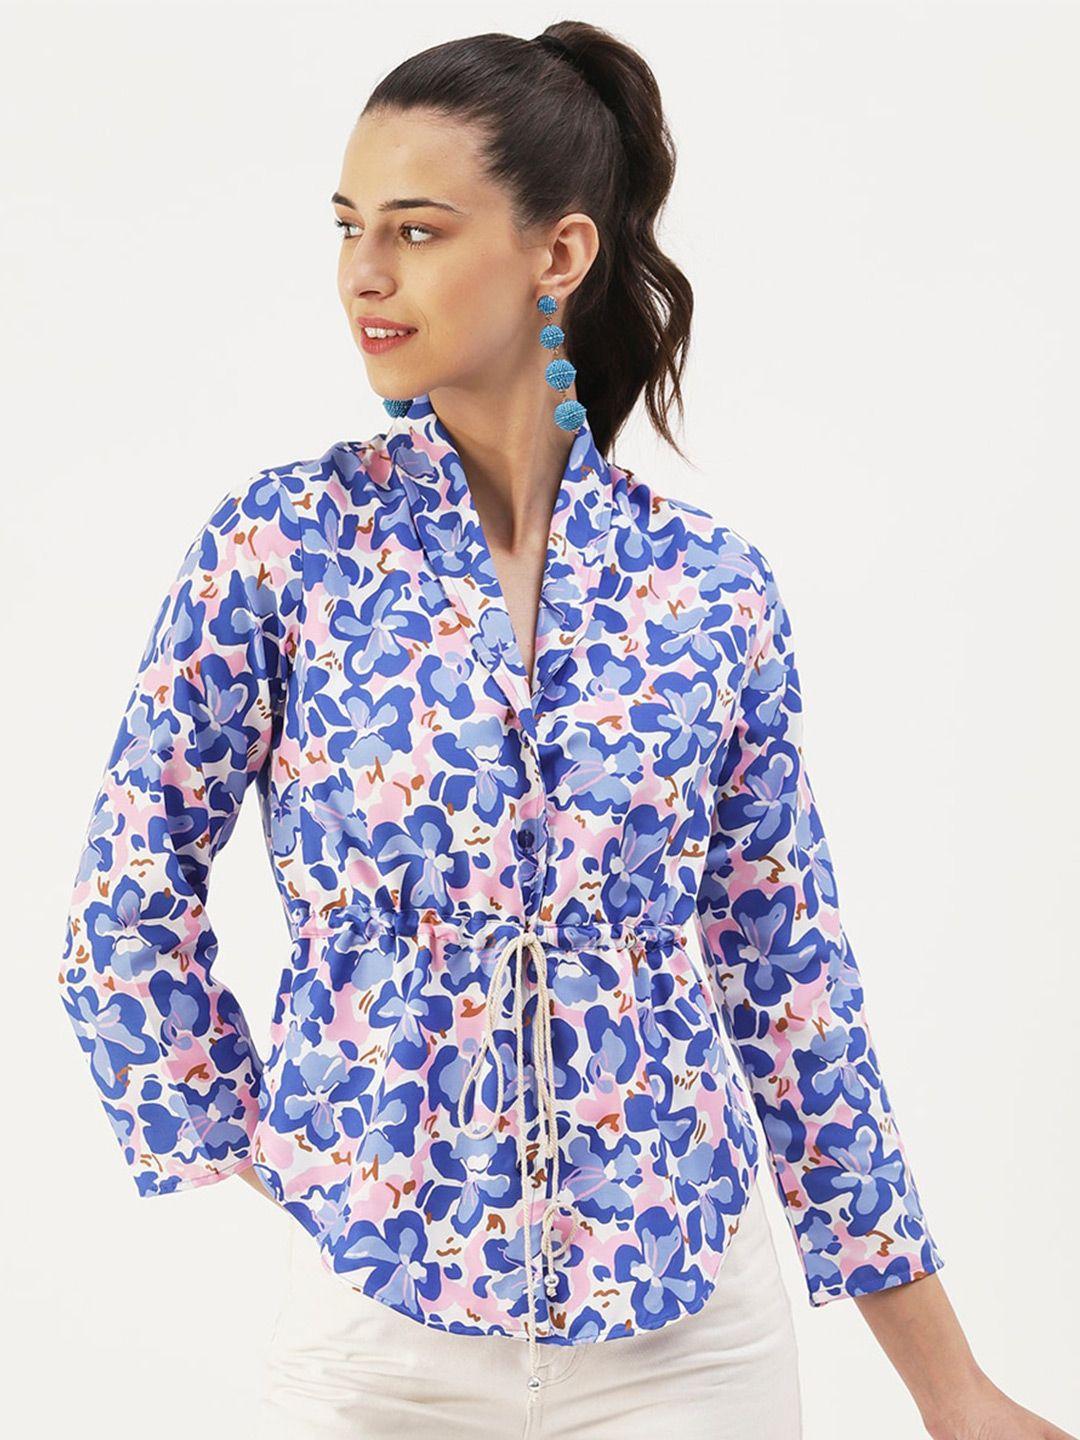 dressberry floral printed shirt style top